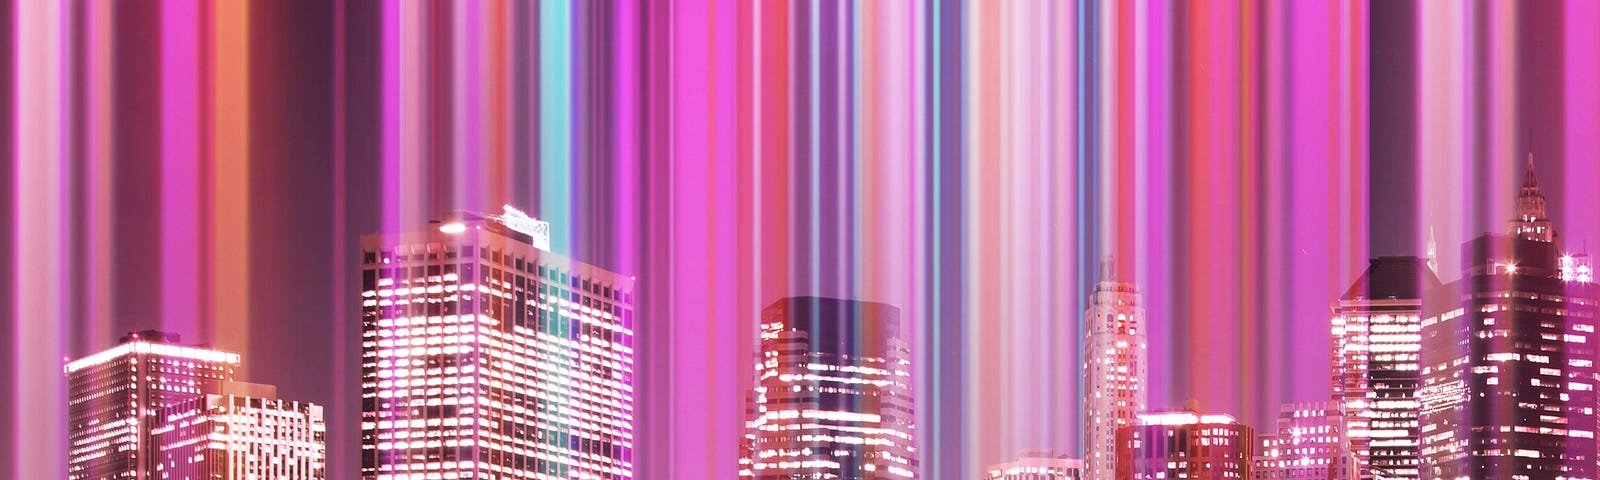 Creative picture of colorful lights emerging from Manhattan city skyscrapers at night.